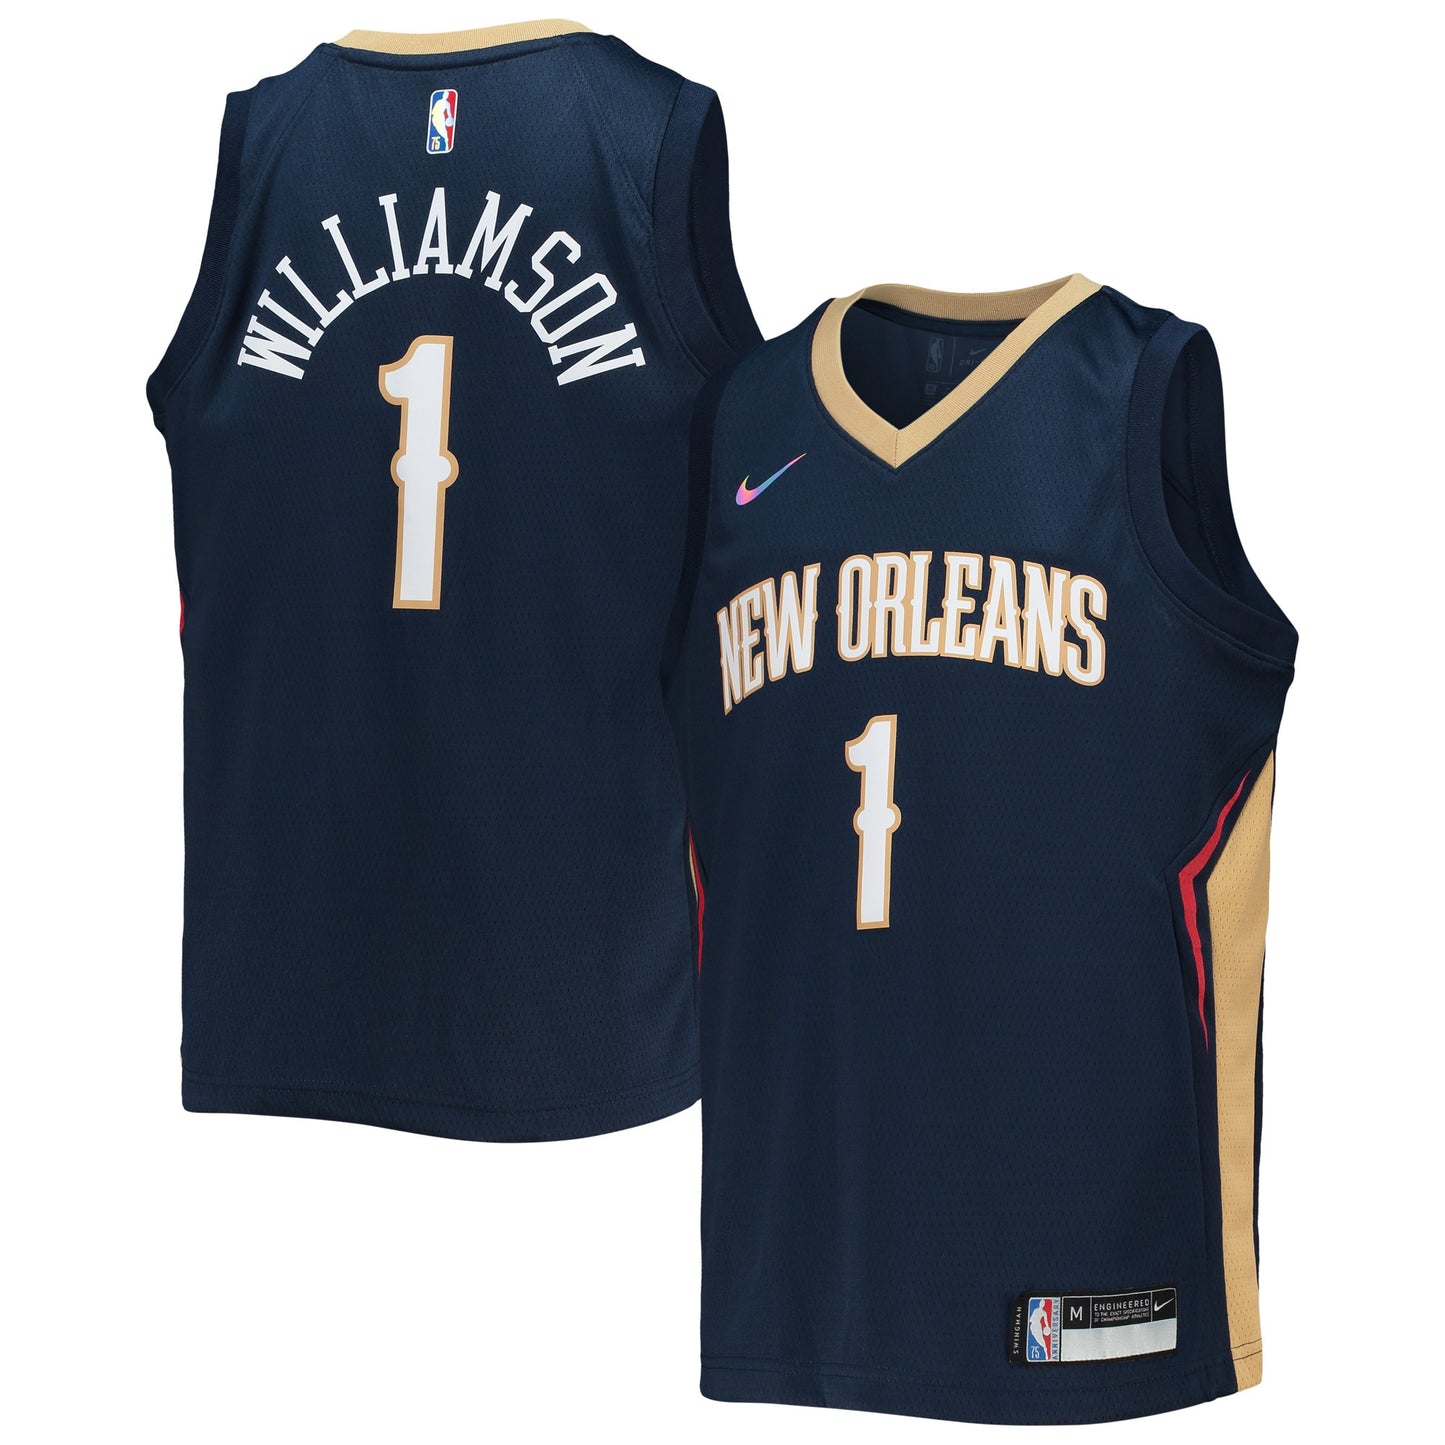 Zion Williamson New Orleans Pelicans Nike Youth 2021/22 Diamond Swingman Jersey - Icon Edition - Navy